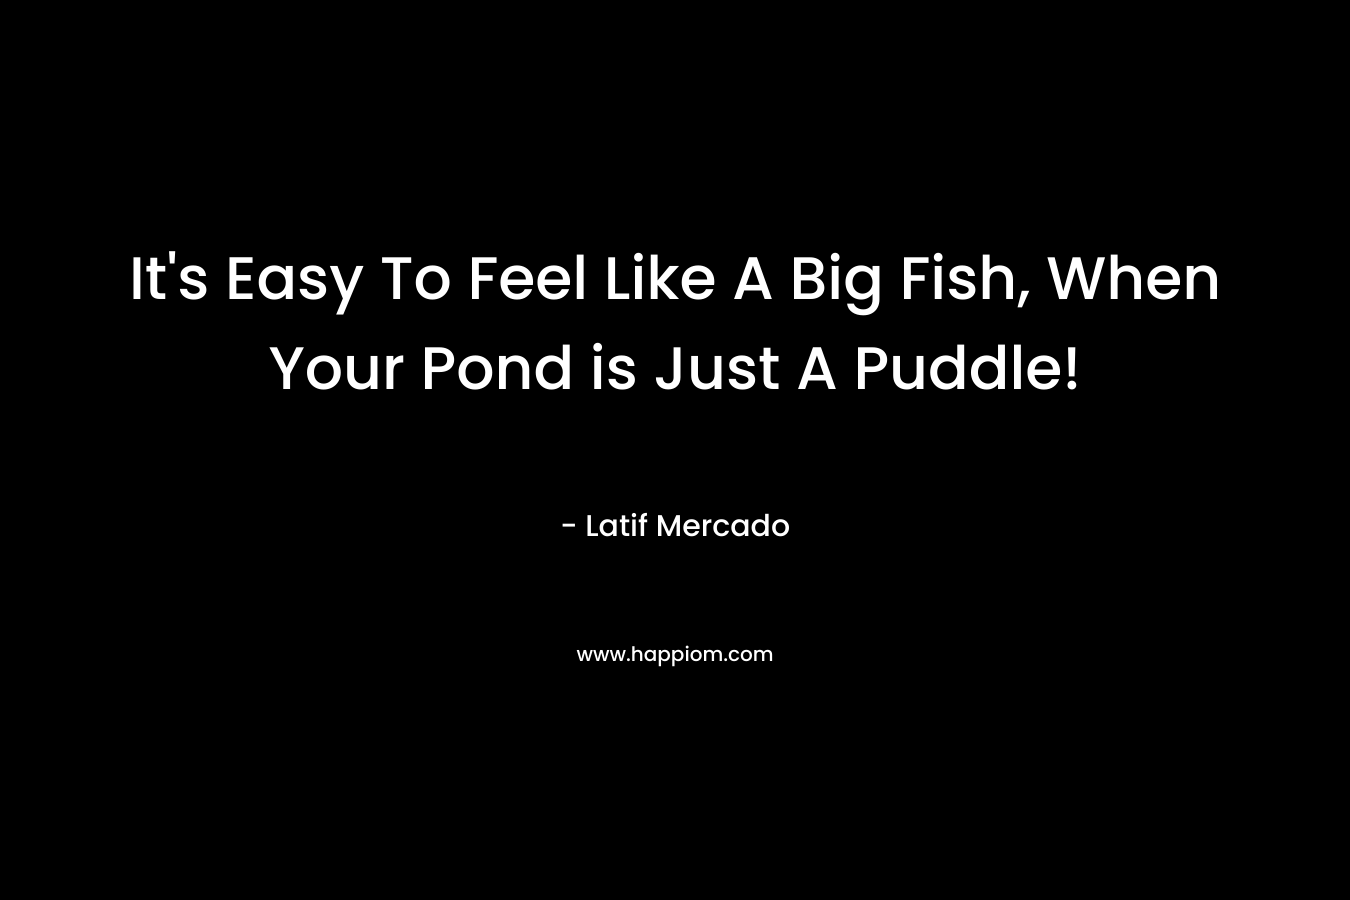 It’s Easy To Feel Like A Big Fish, When Your Pond is Just A Puddle! – Latif Mercado